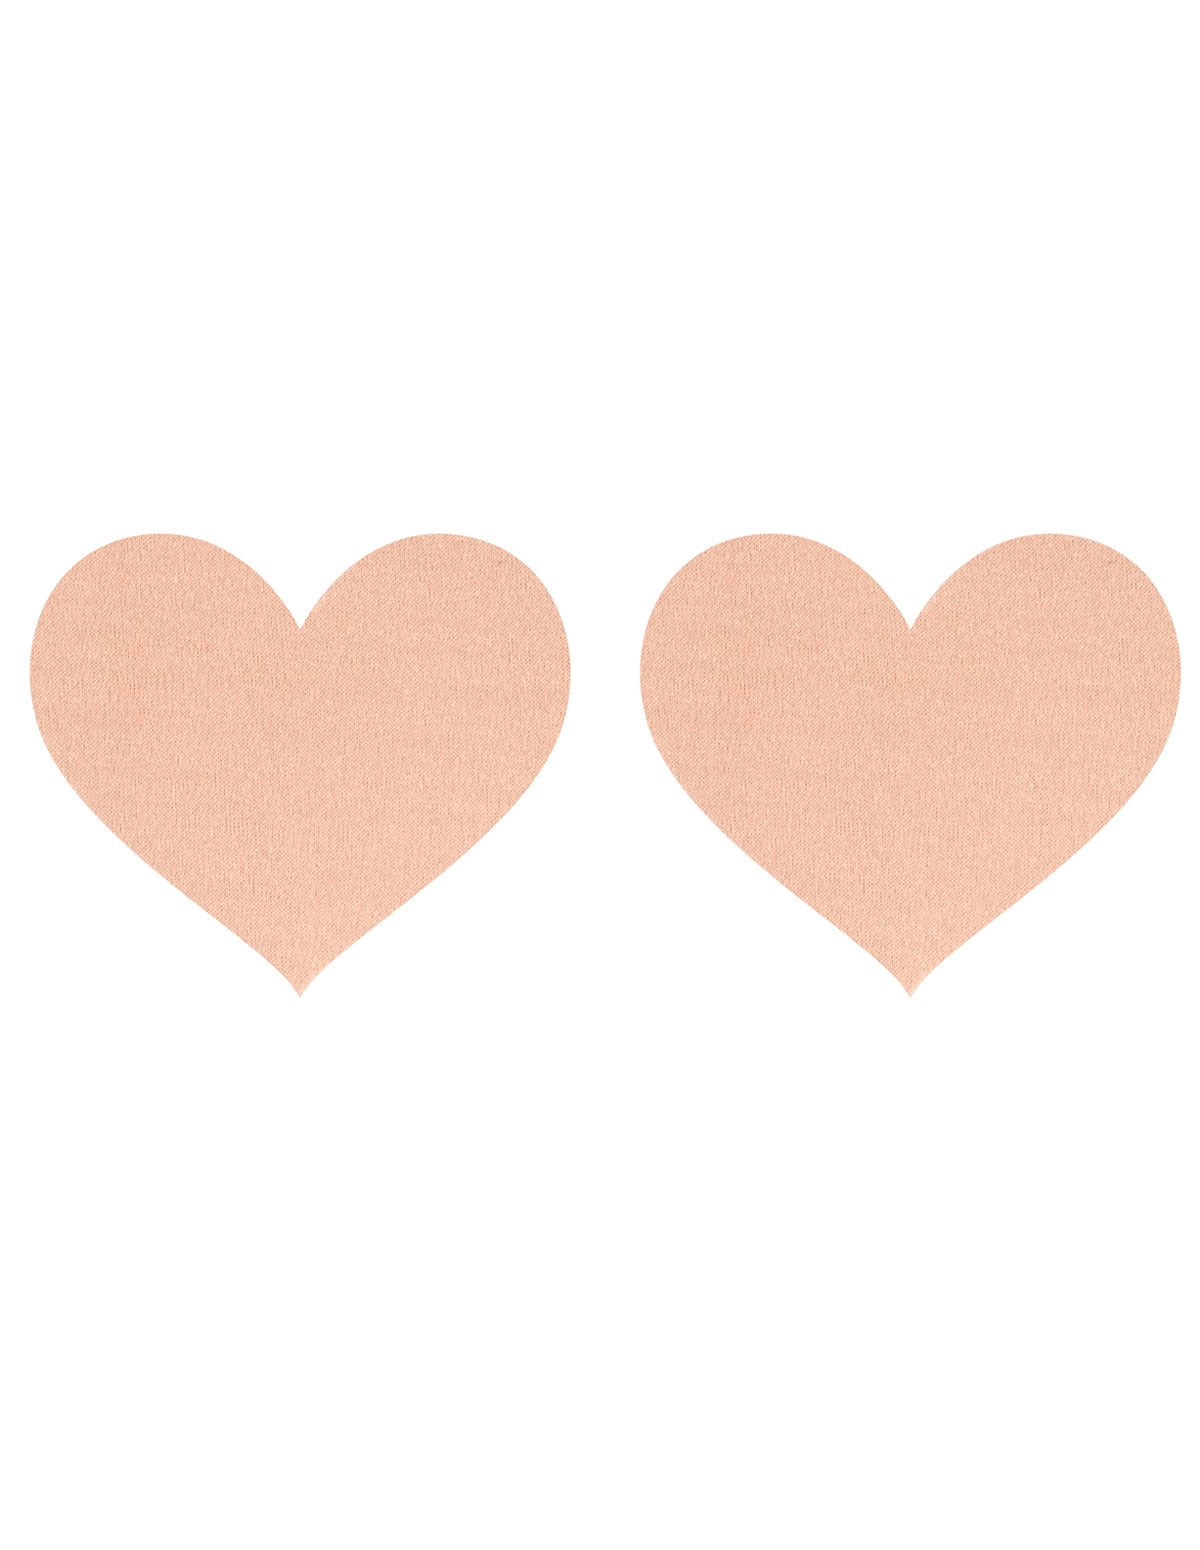 alternate image for Nude Satin Heart Pasties